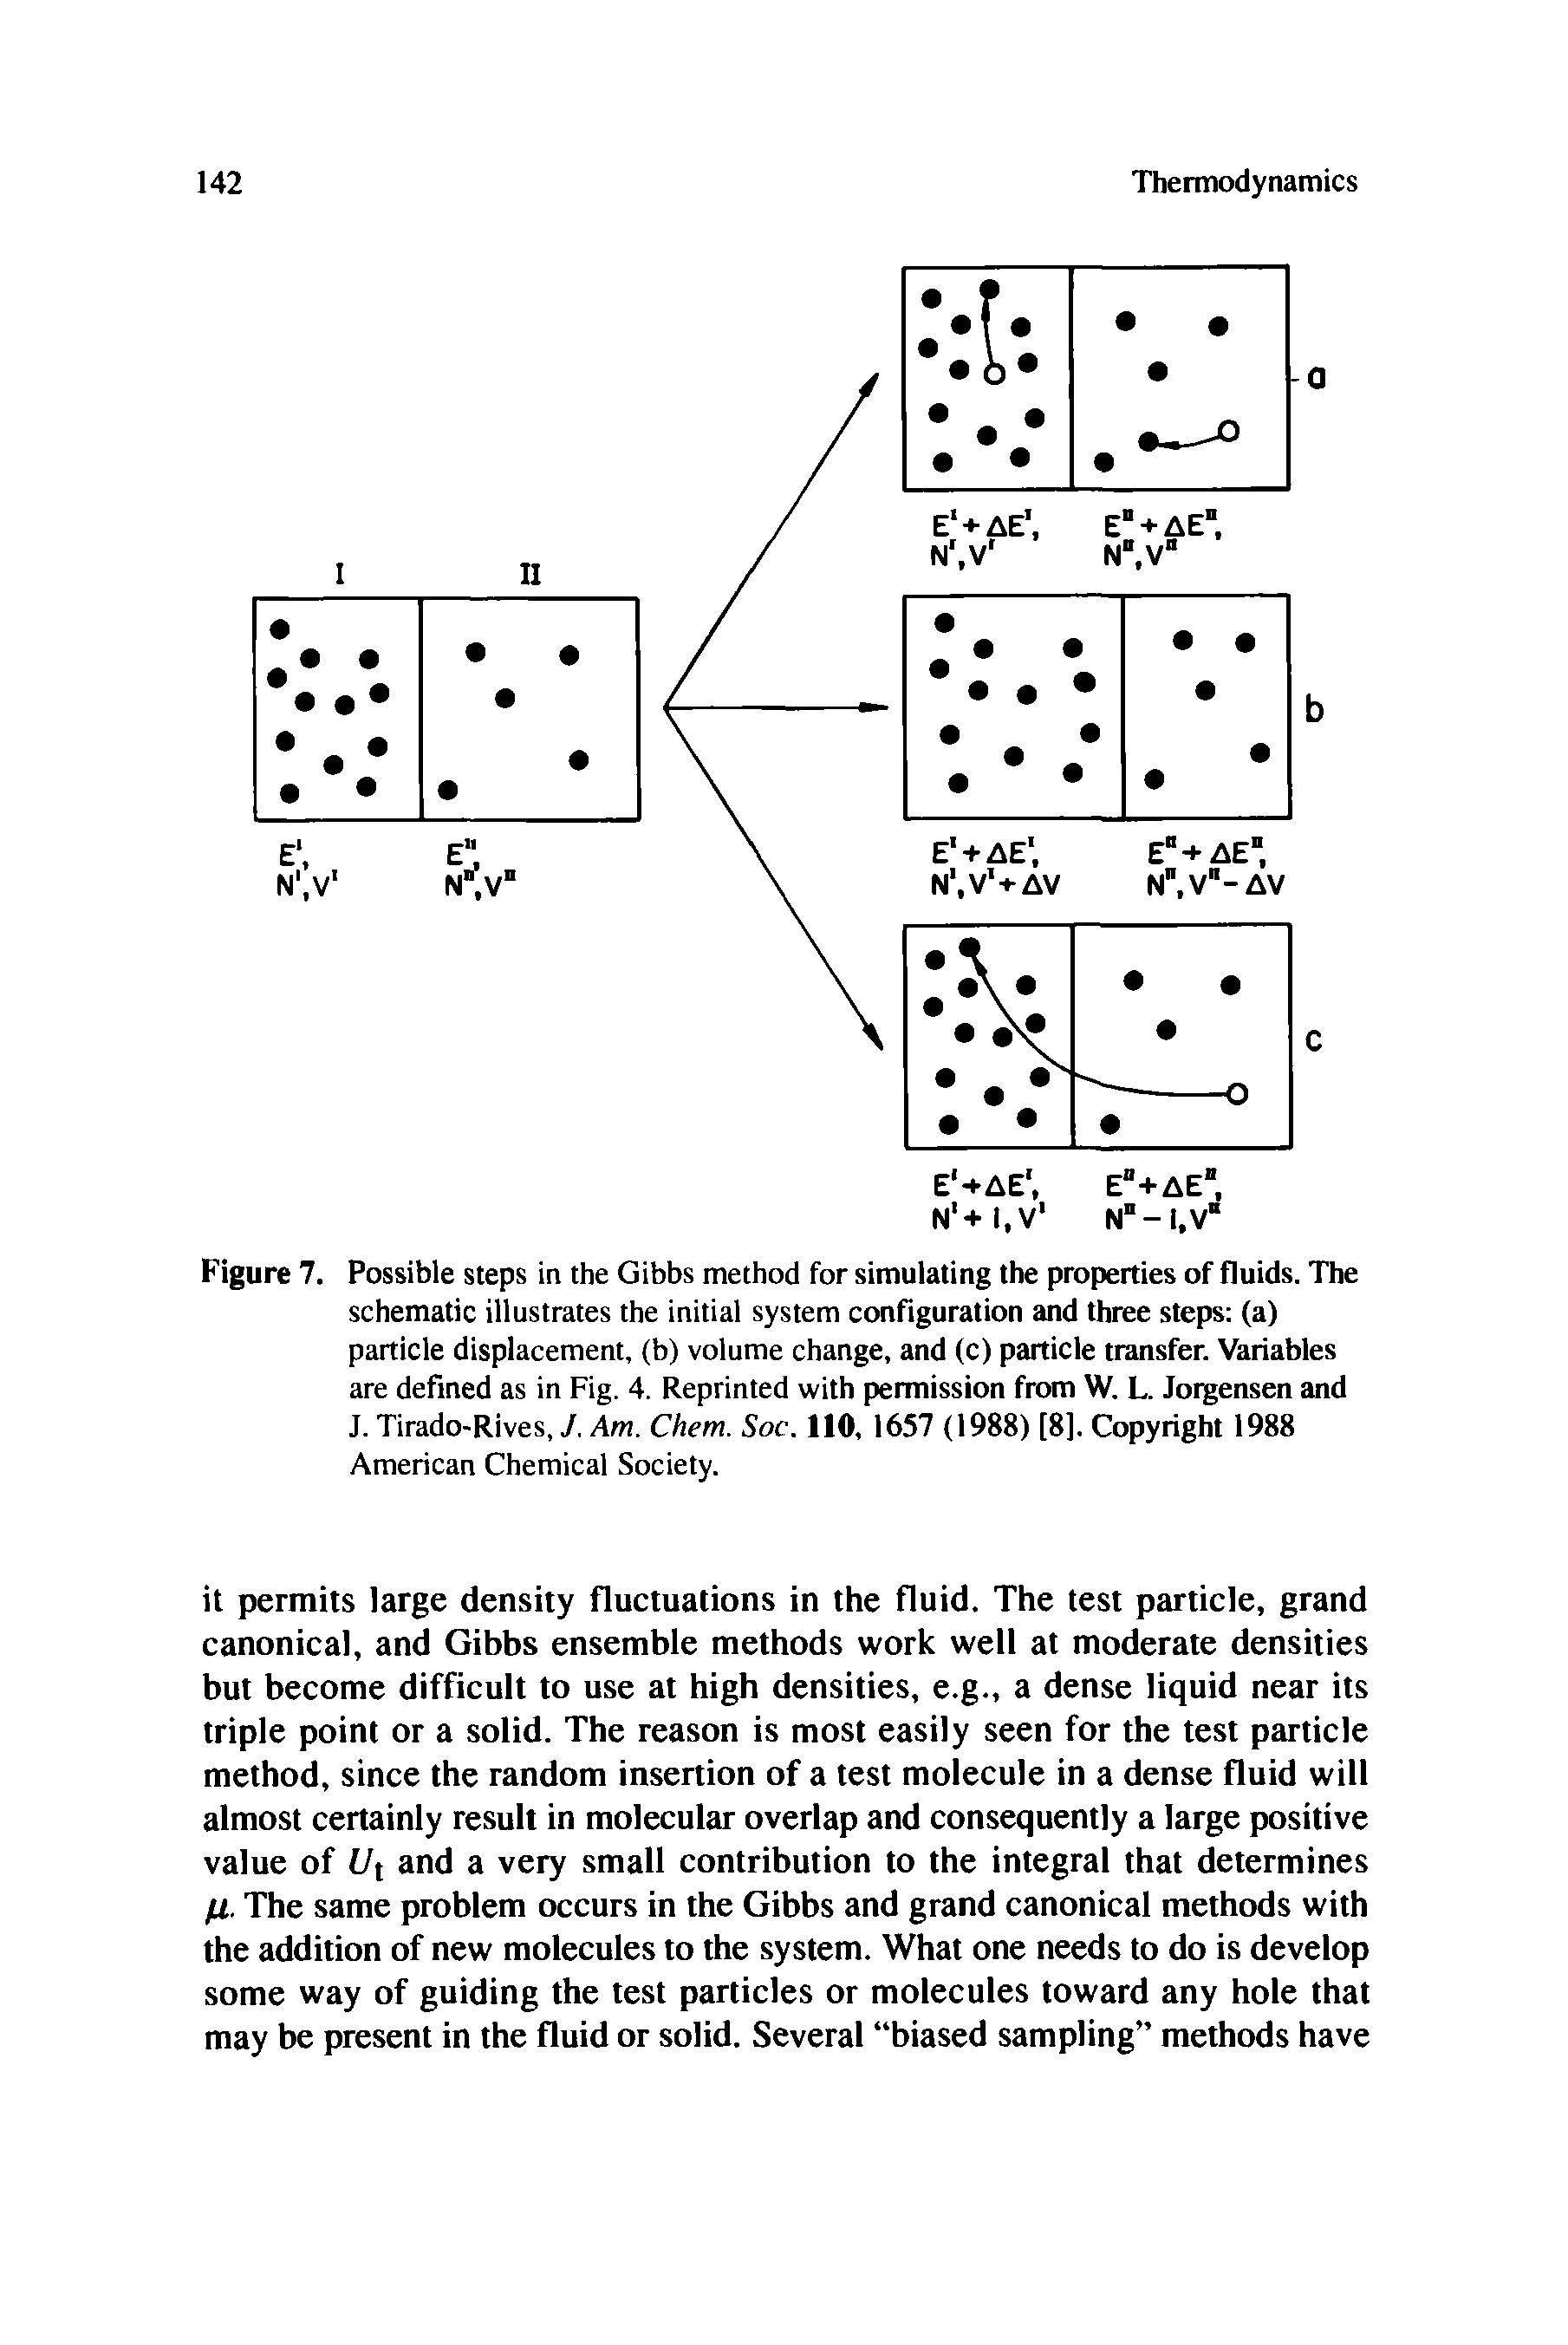 Figure 7. Possible steps in the Gibbs method for simulating the properties of fluids. The schematic illustrates the initial system configuration and three steps (a) particle displacement, (b) volume change, and (c) particle transfer. Variables are defined as in Fig. 4. Reprinted with permission from W. L. Jorgensen and J. Tirado-Rives, J. Am. Chem. Soc. 110, 1657 (1988) [8], Copyright 1988 American Chemical Society.